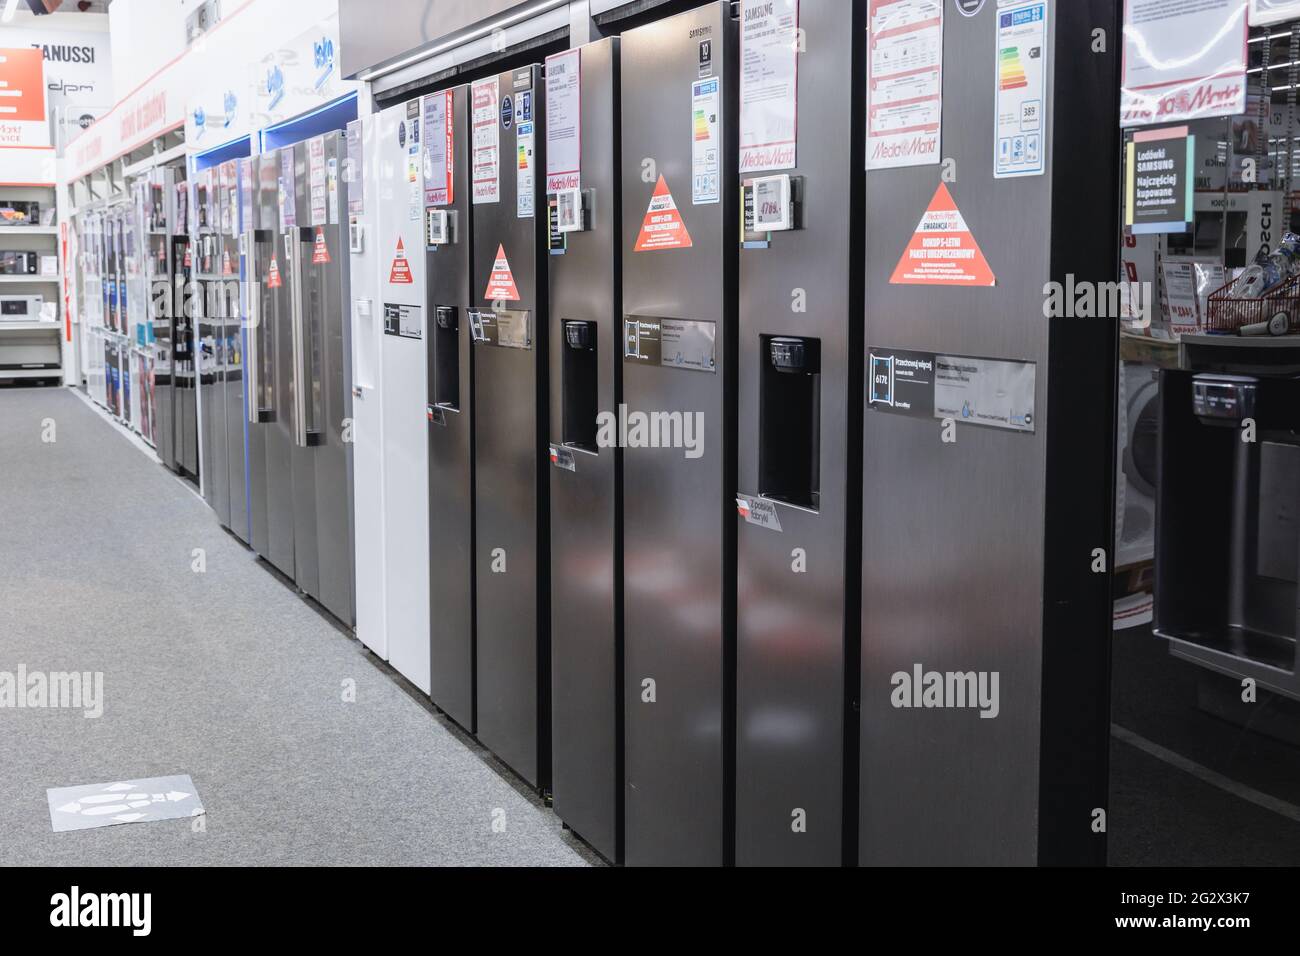 MediaMarkt store with household appliances and consumer electronics in Warsaw, Poland Stock Photo